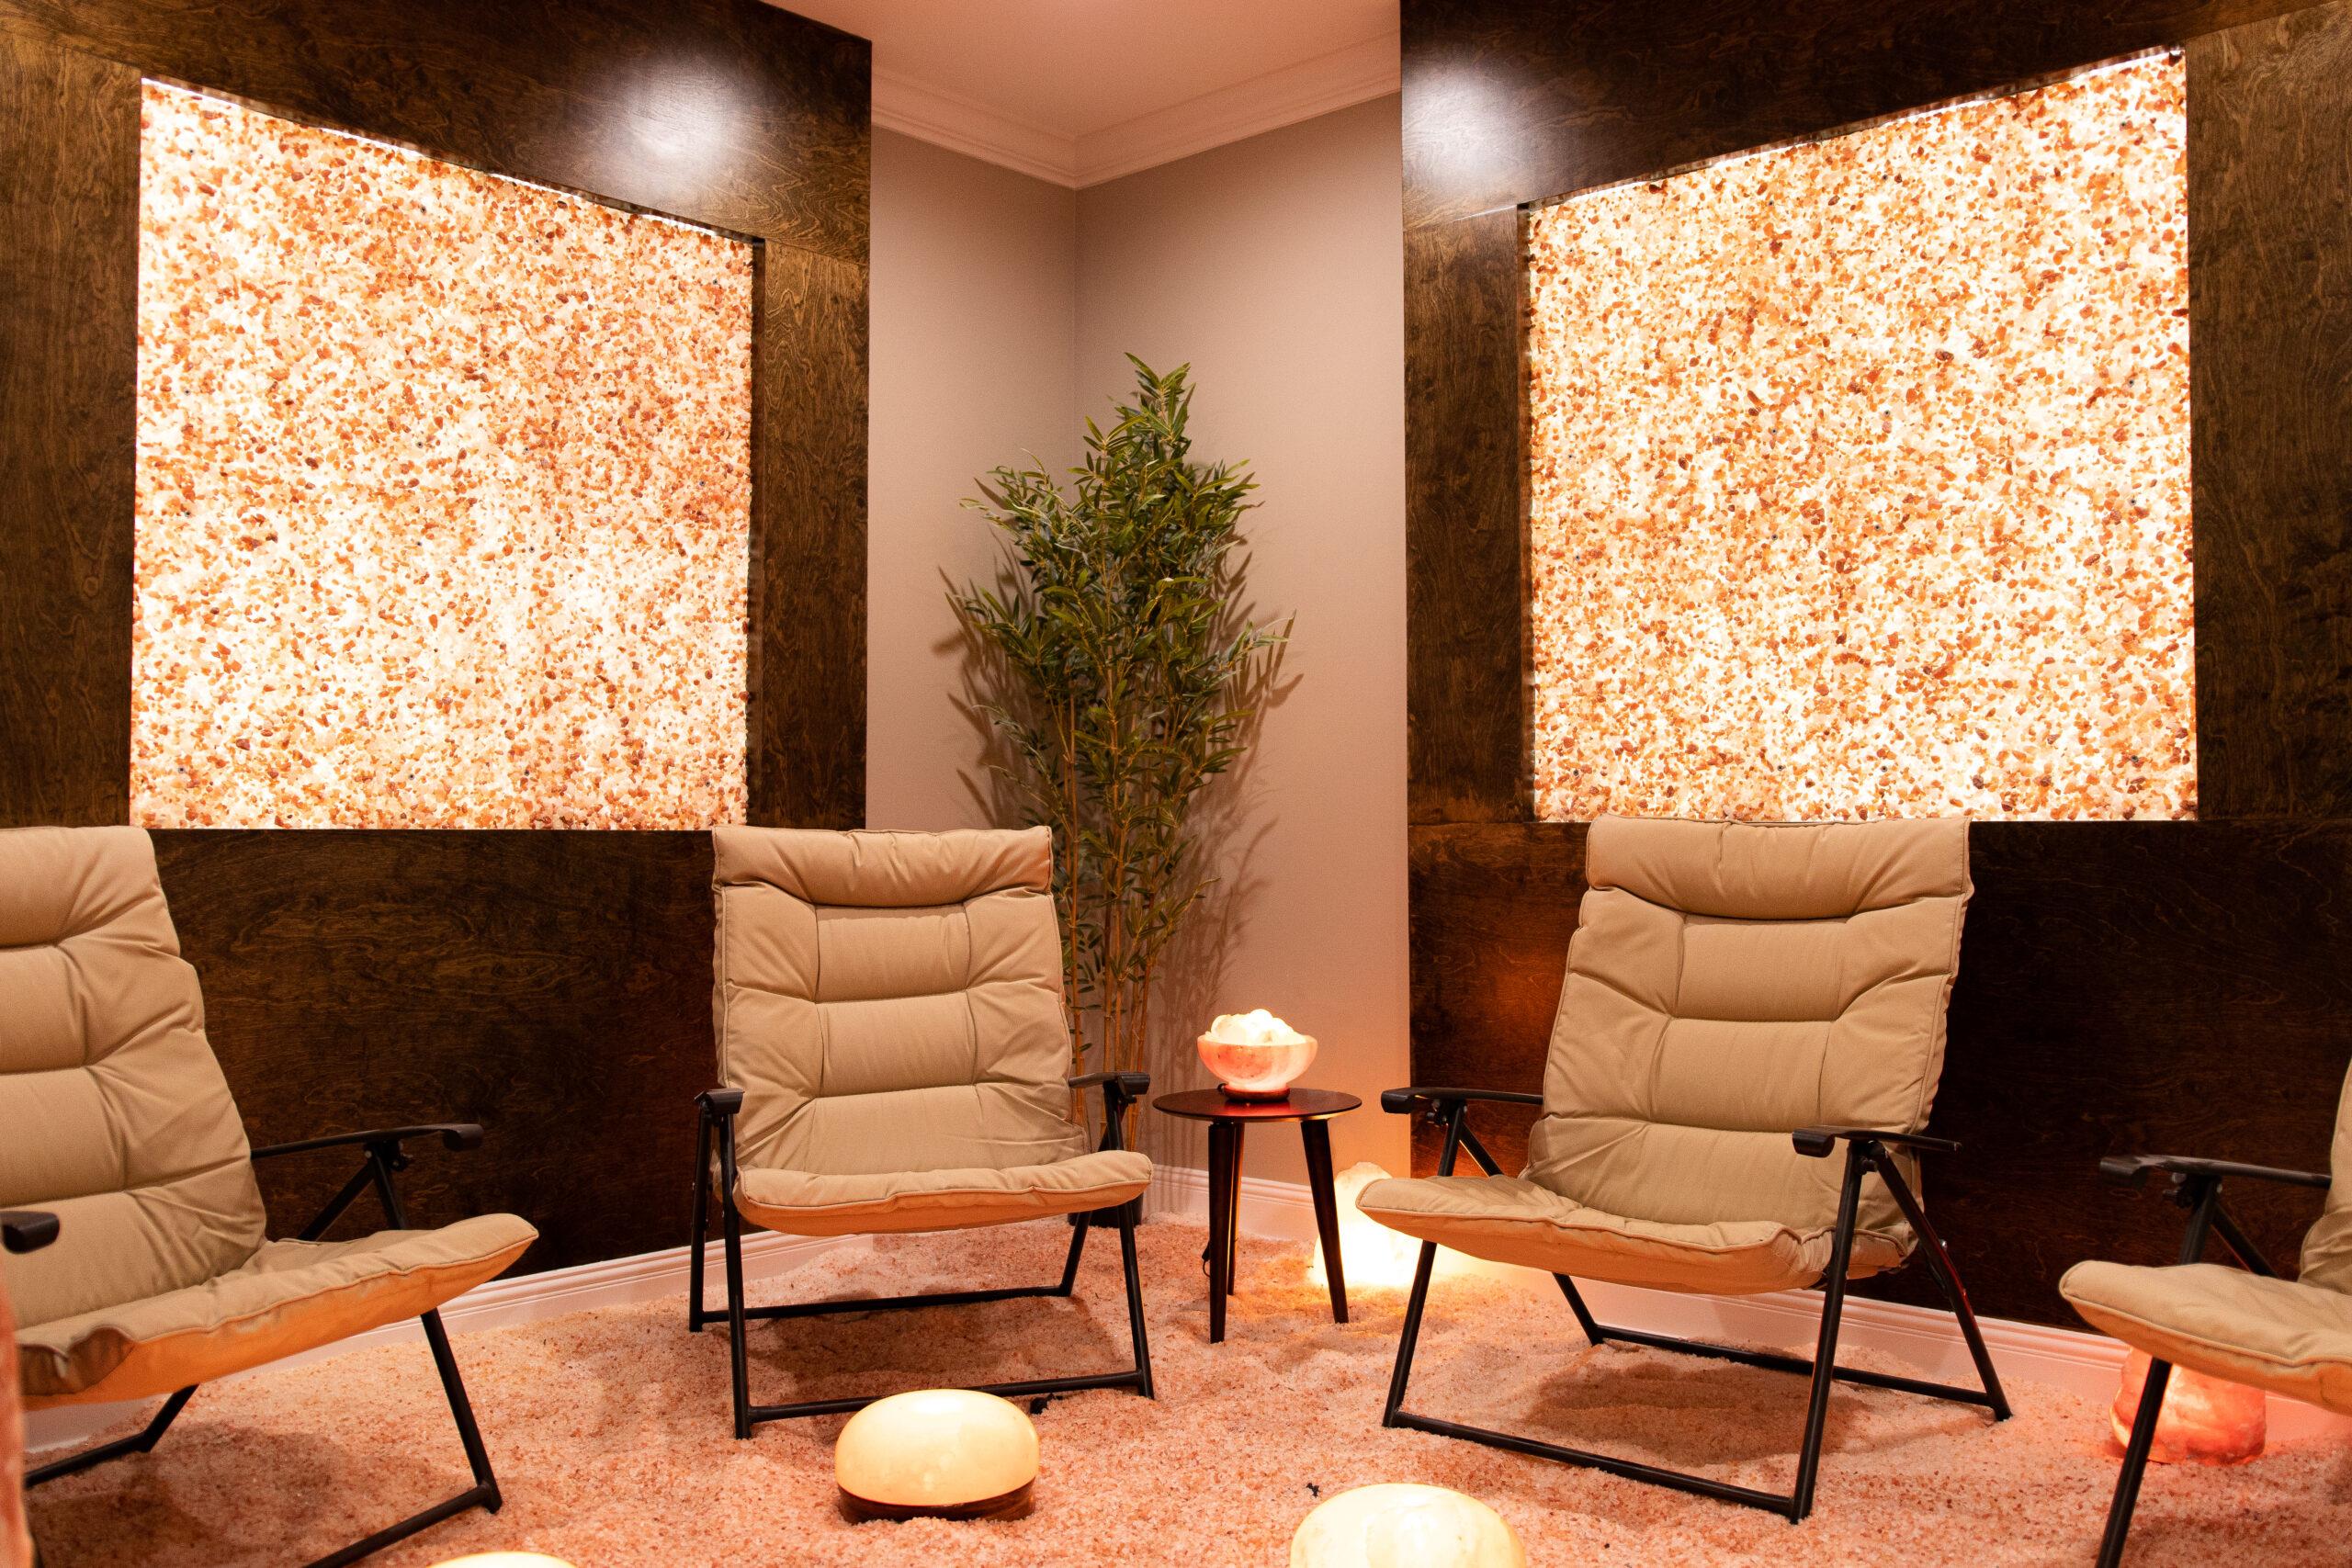 The Salt Room At Inspire Dry Salt Therapy In Florence, Alabama With Three Chairs And Custom Himalayan Salt Panels On The Walls For Décor.